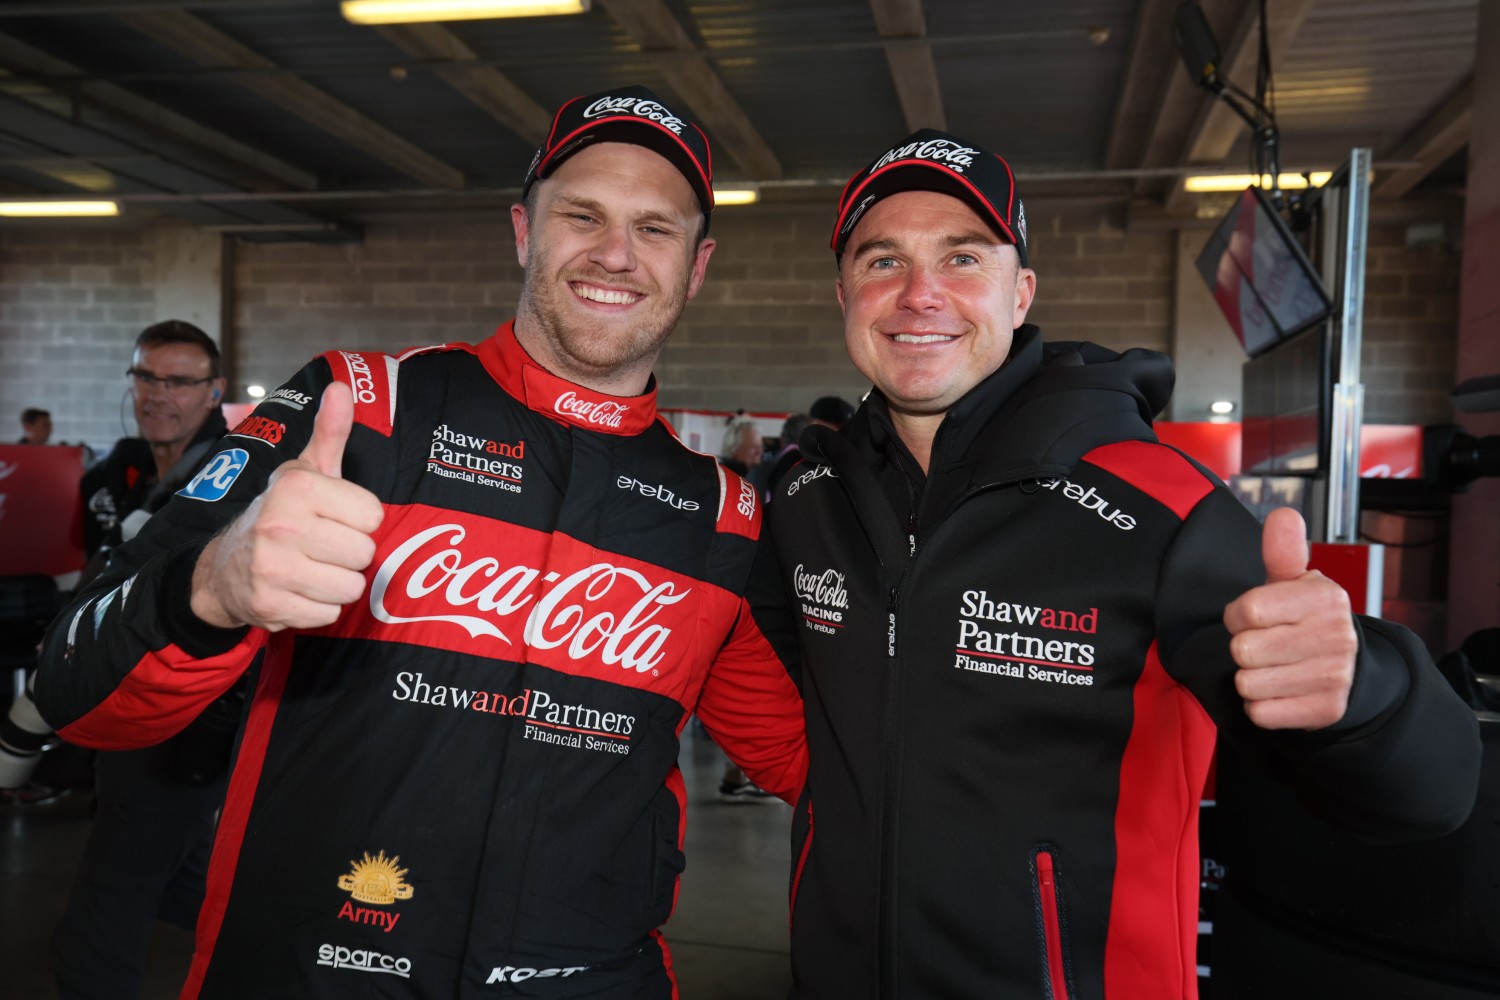 Bathurst 1000: #9 Camaro co-drivers Kostecki and Russell